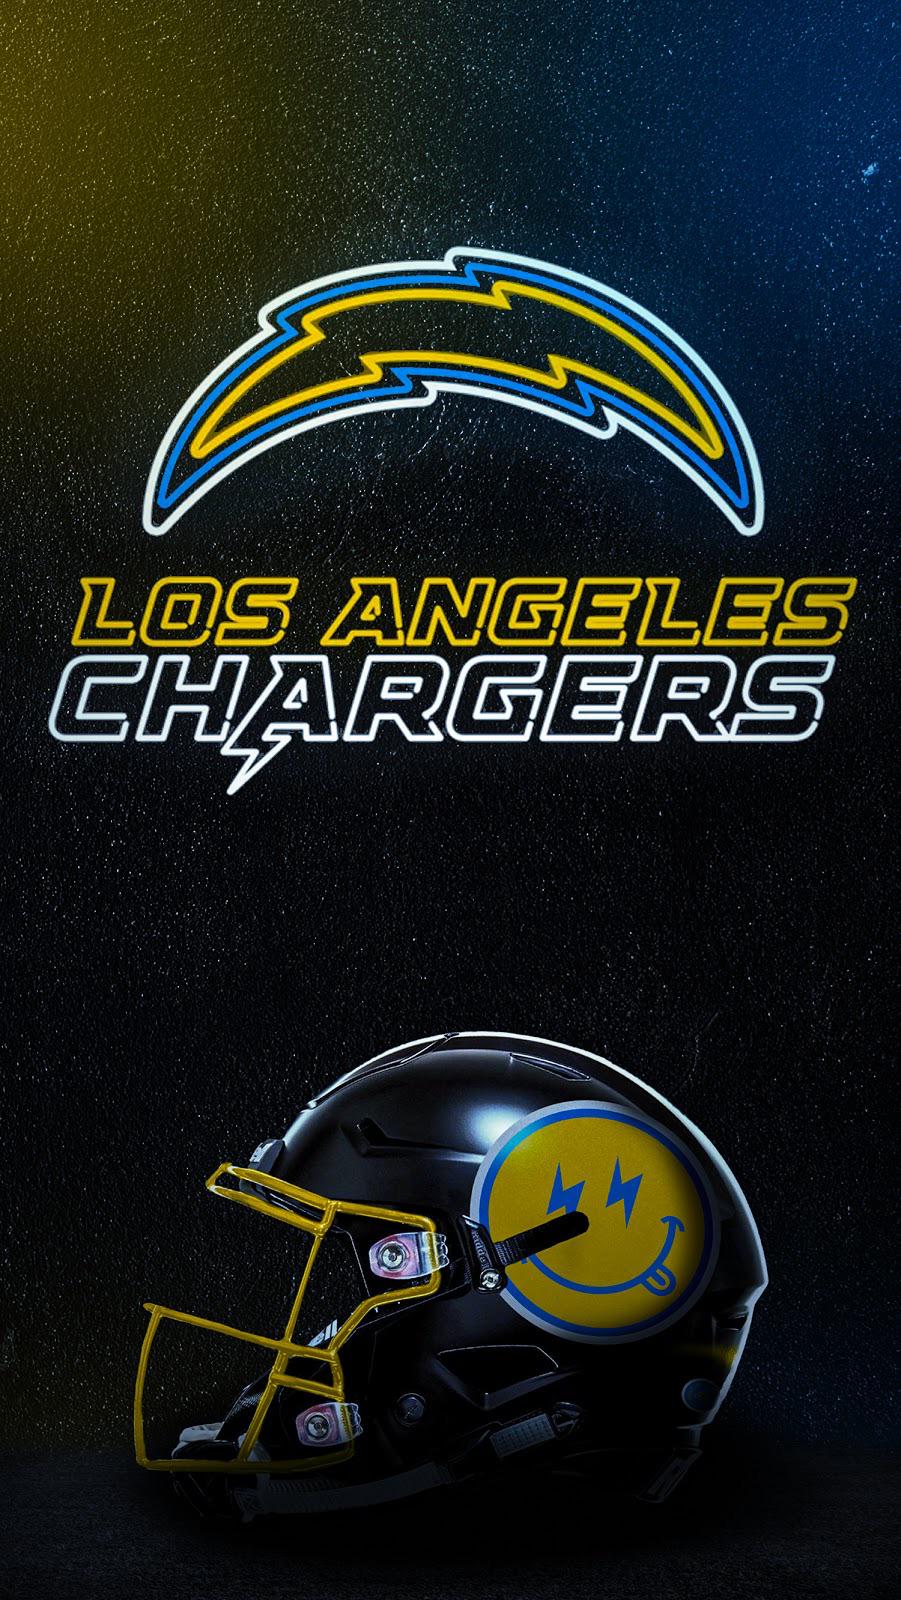 Phone wallpaper with new logo and a helmet concept